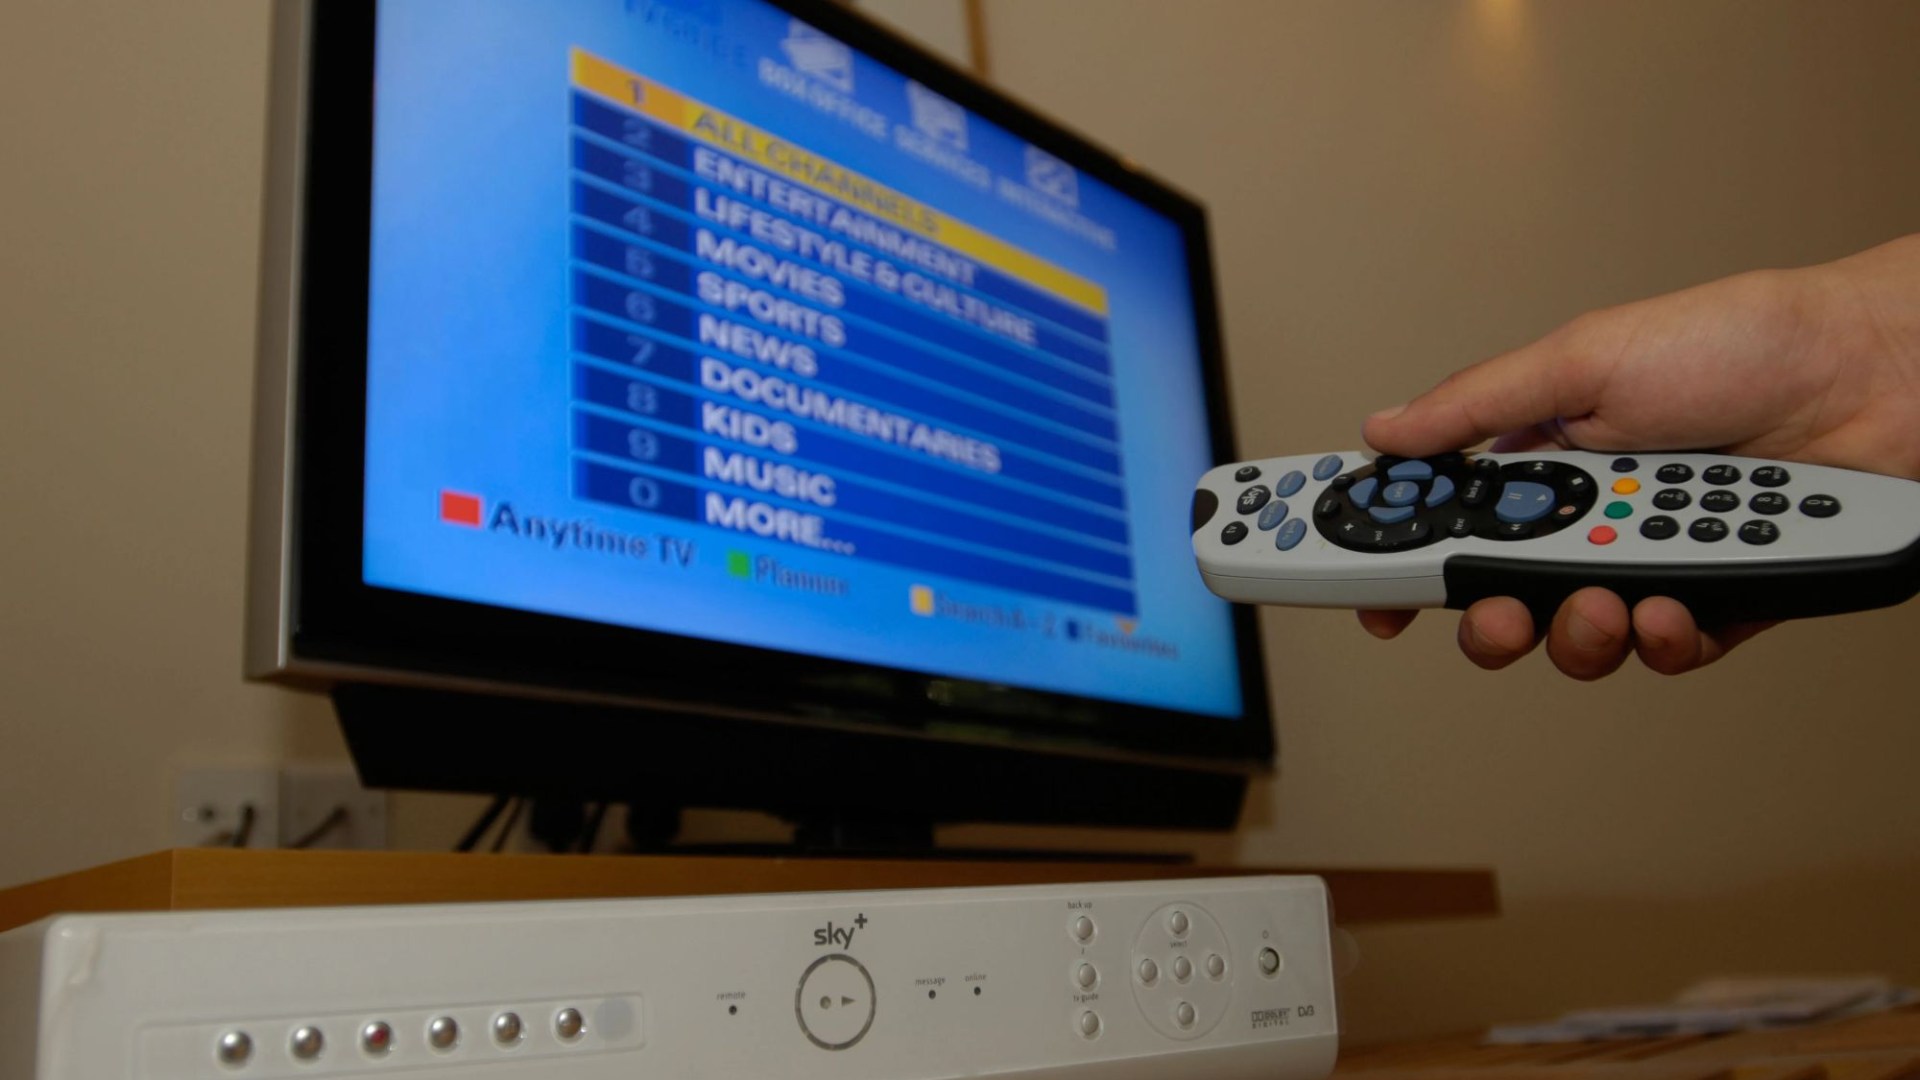 Urgent Alert: Don’t Miss Your Favorite Shows! Sky TV Viewers Must Check Out Channel Changes Now